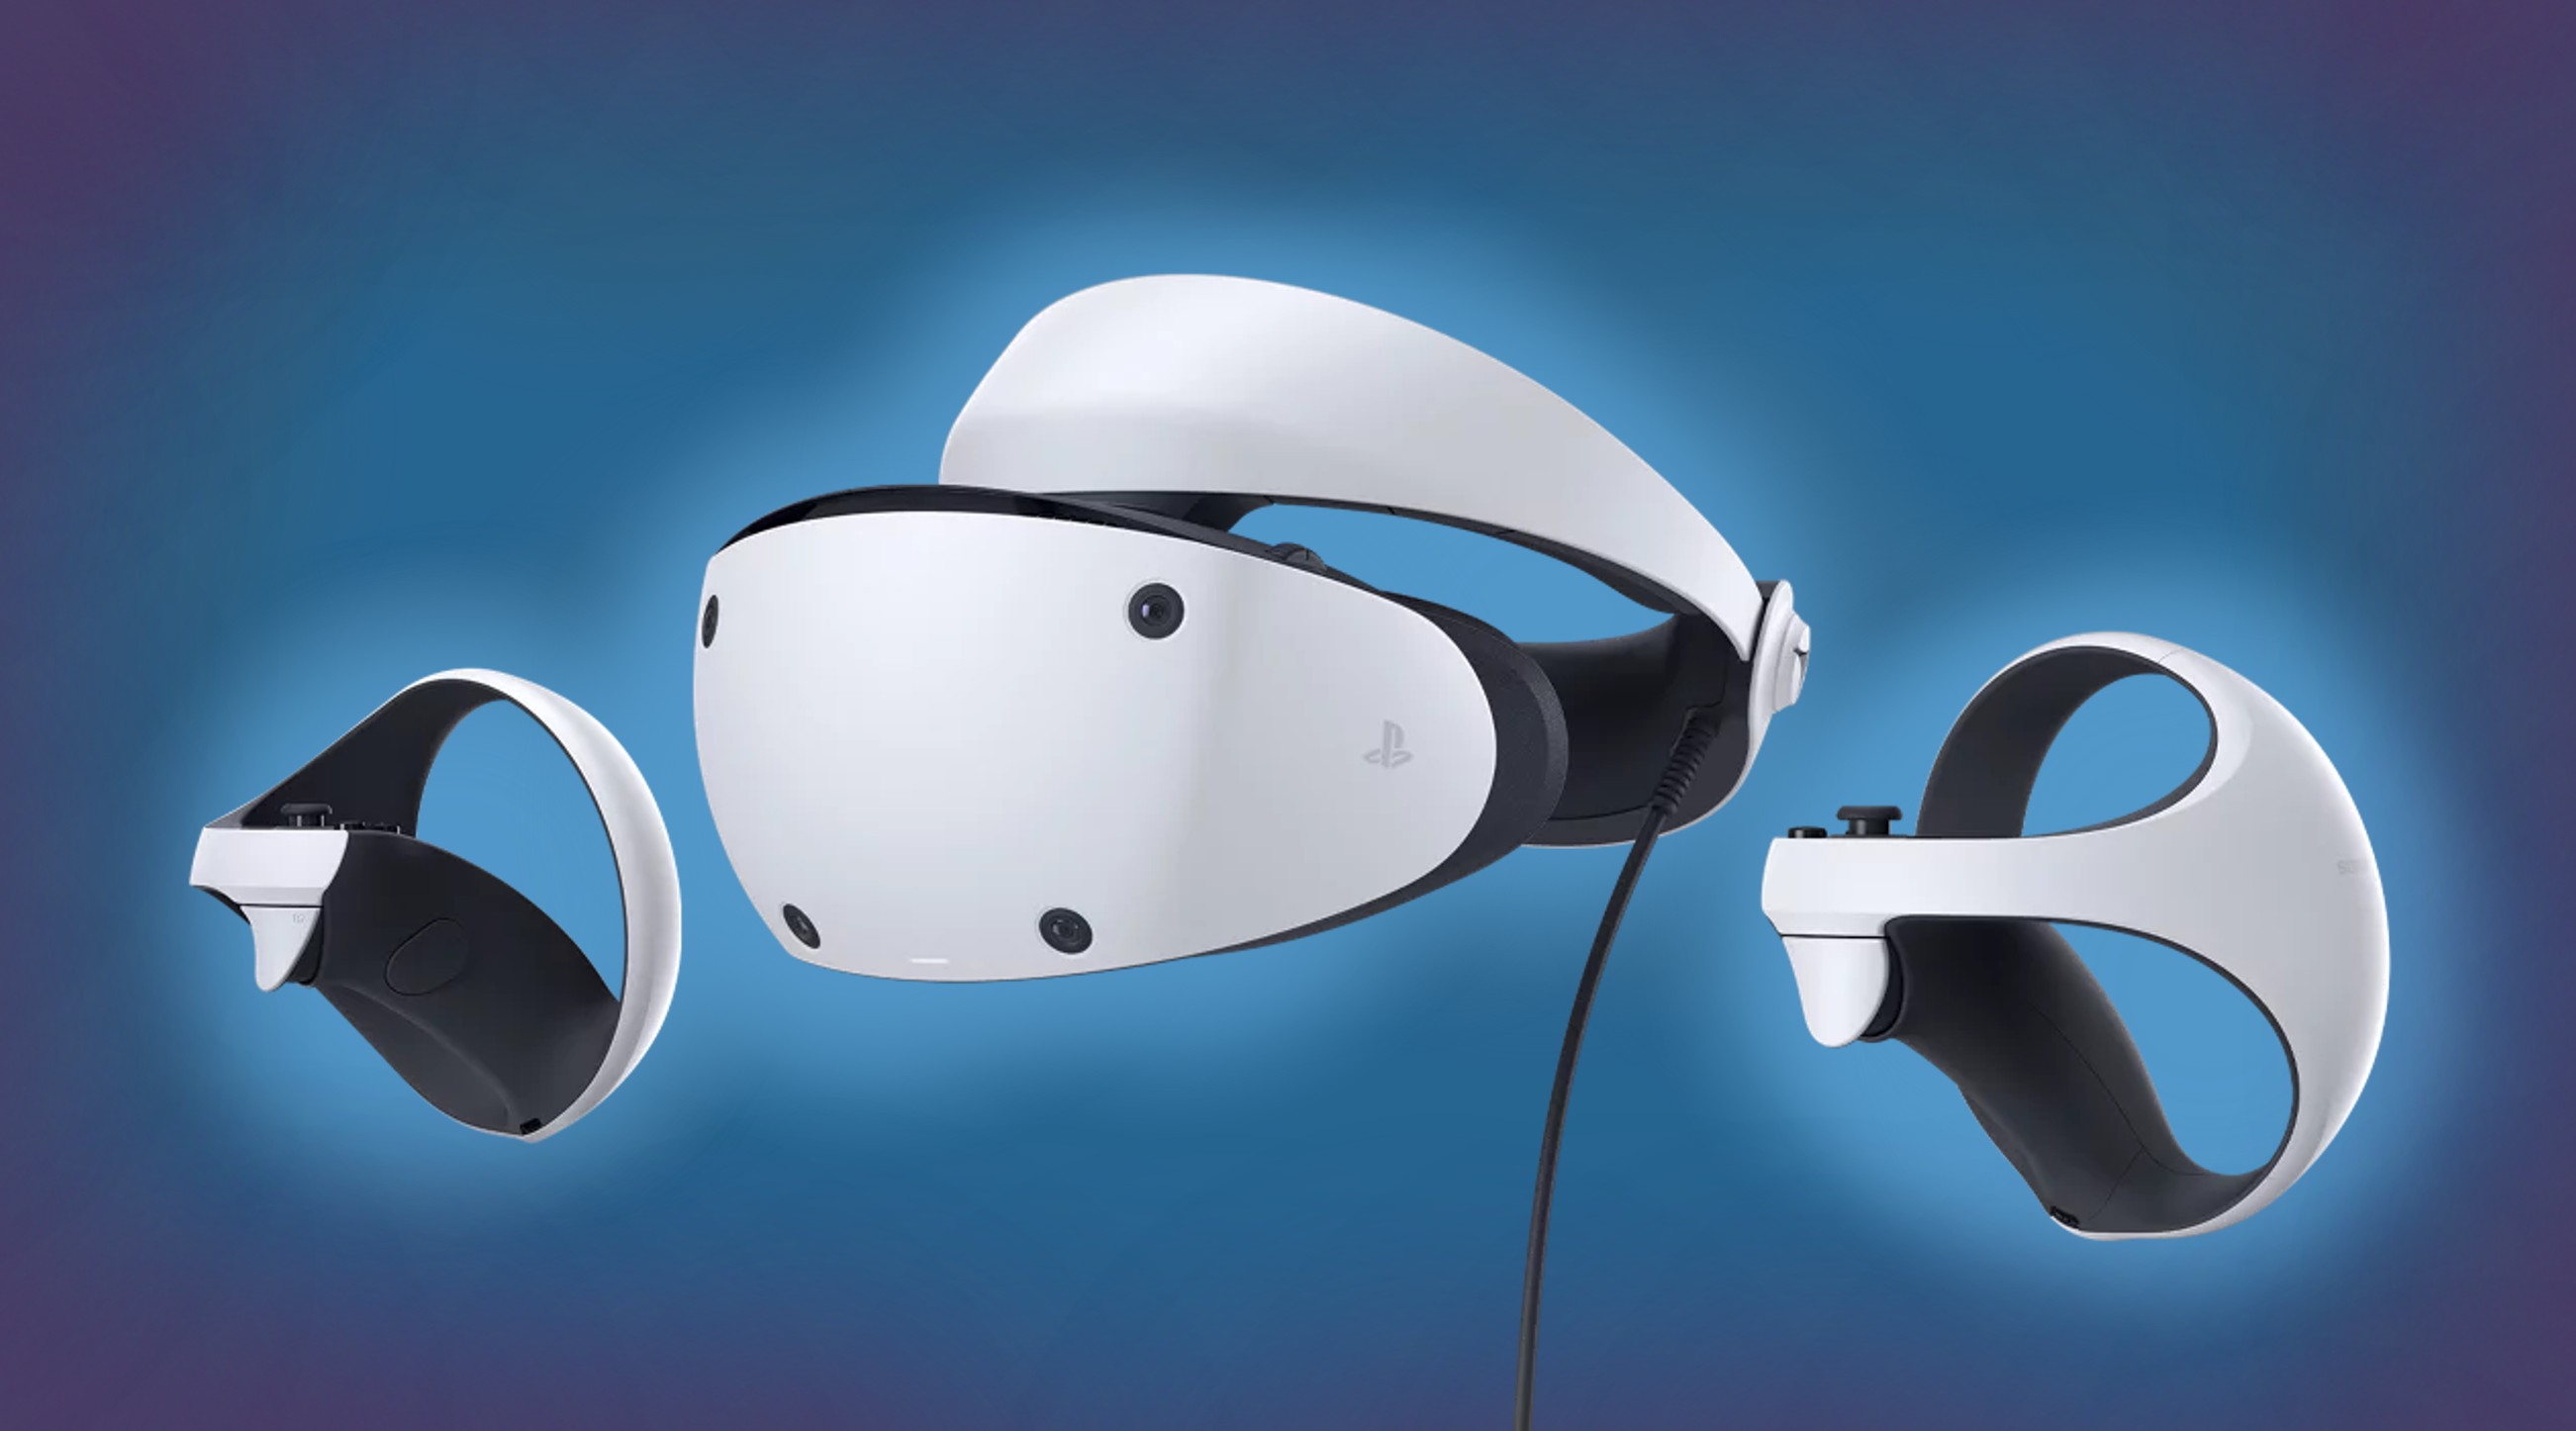 The PlayStation VR2 virtual reality headset is now available for pre-order!